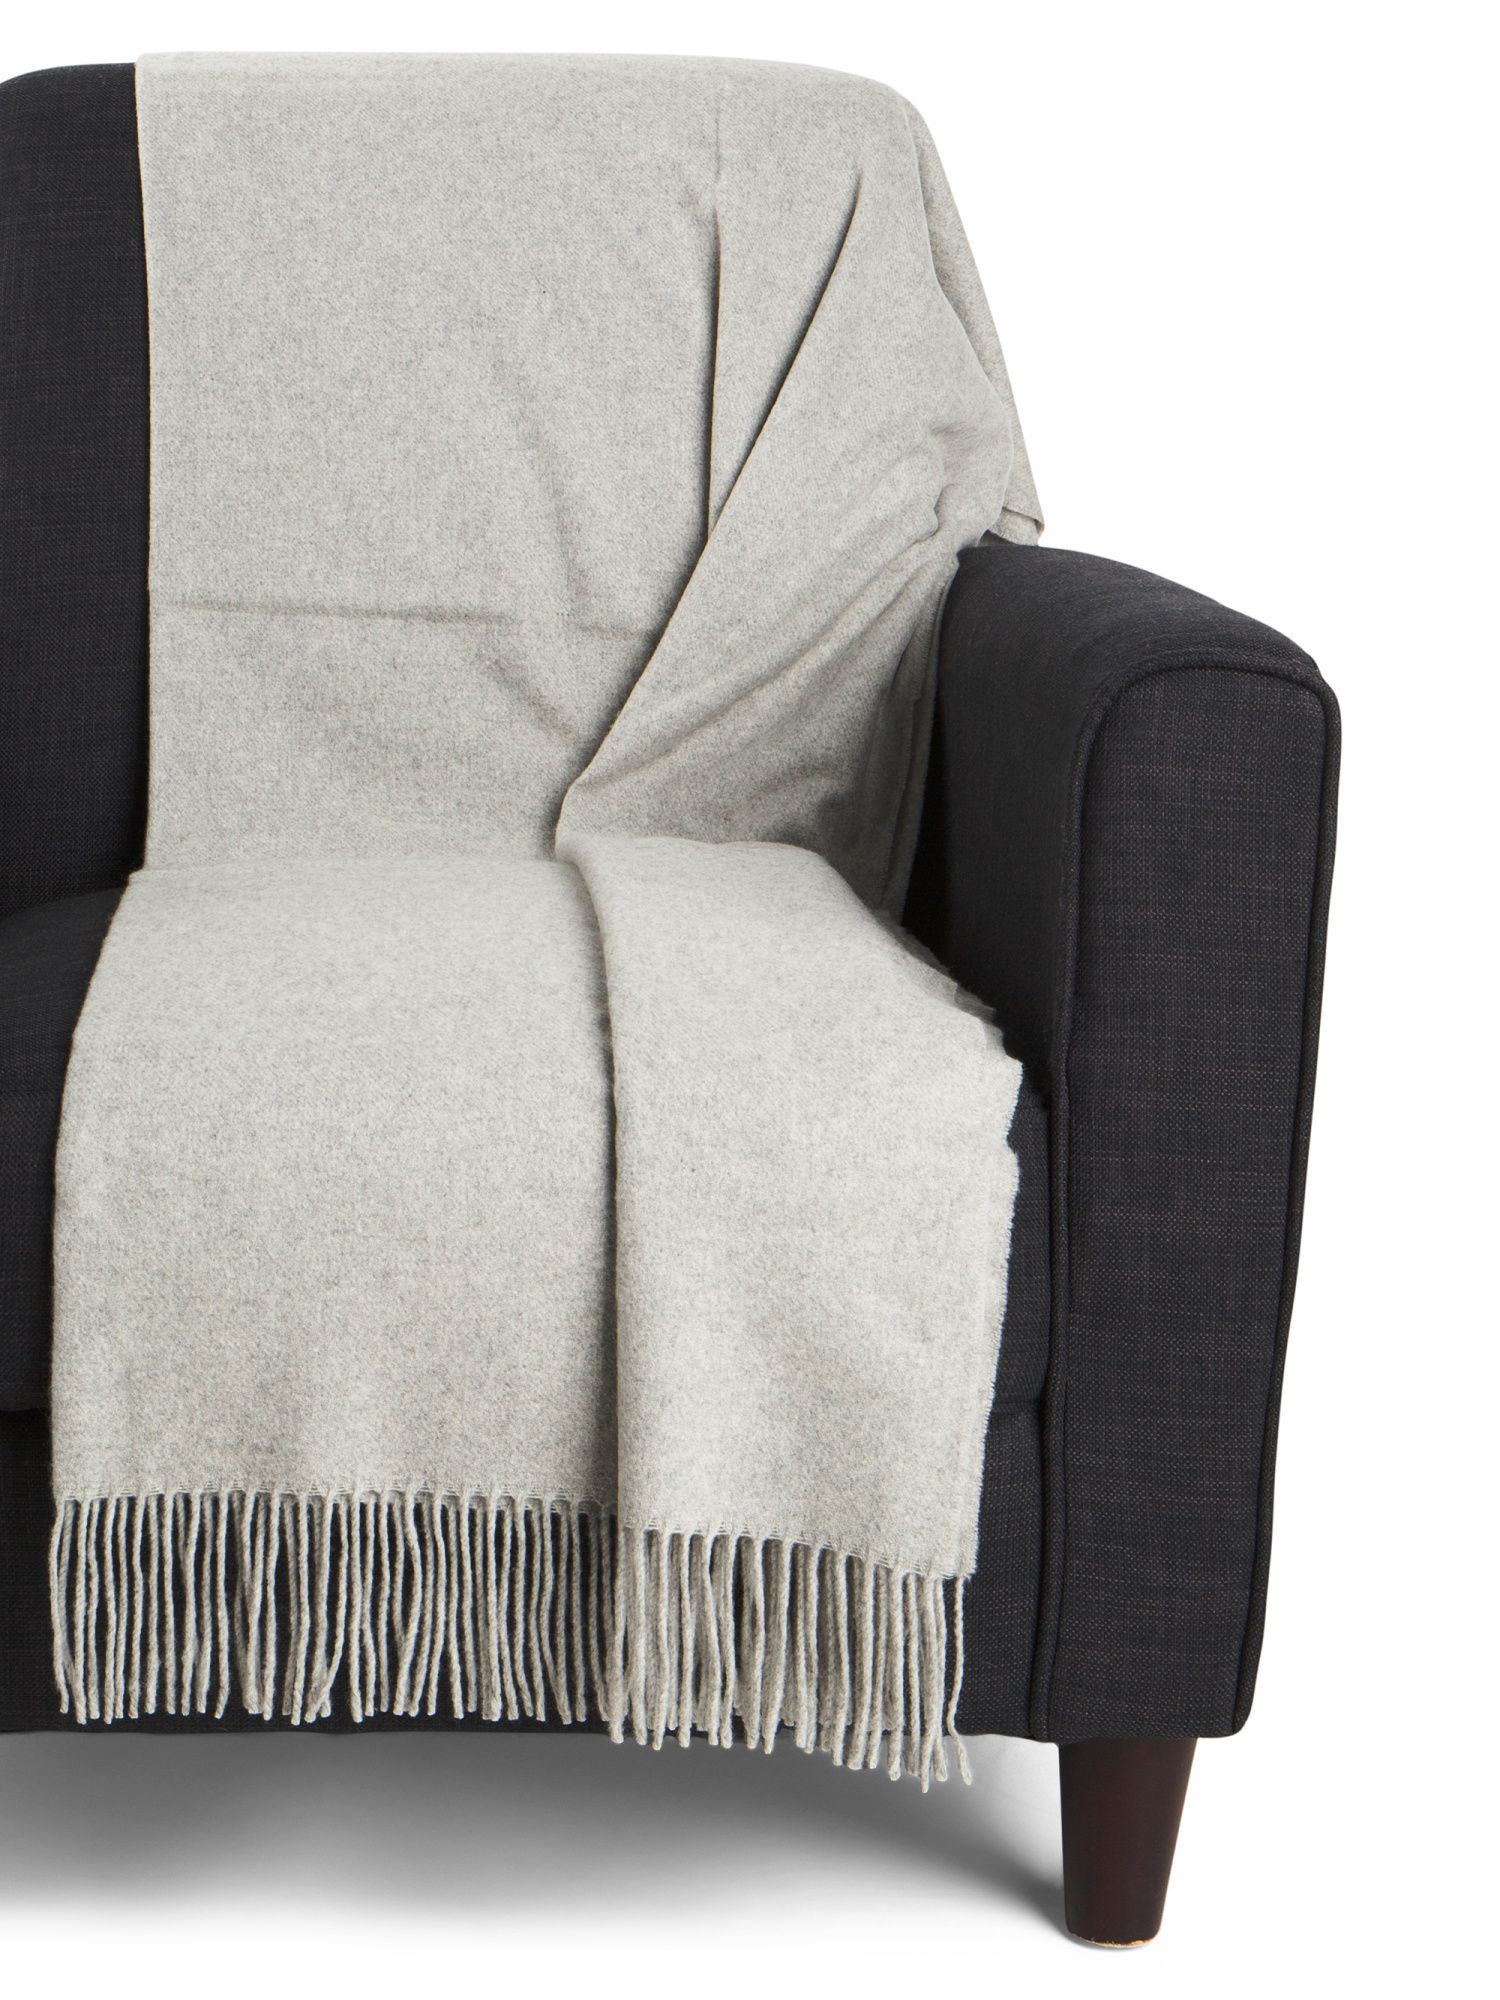 Made In Italy Cashmere Throw | TJ Maxx